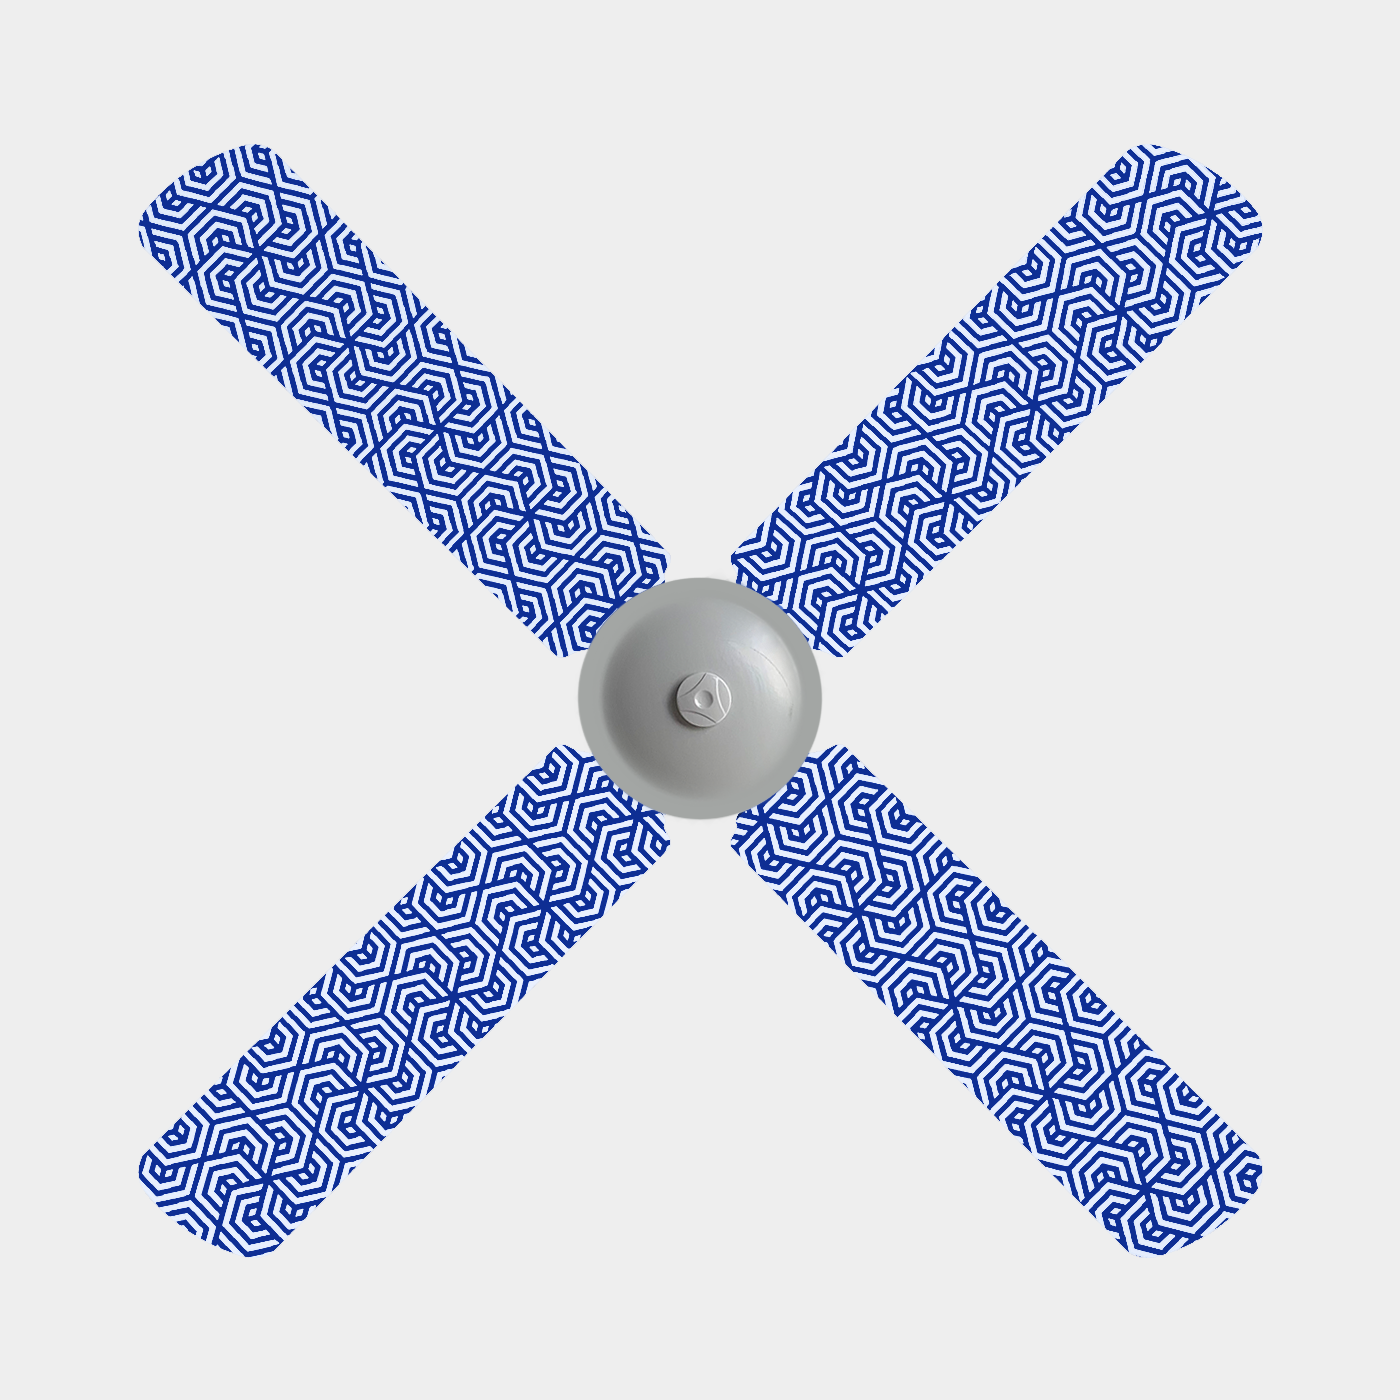 Fabric covers with blue background and white geometric pattern on three blade ceiling fan